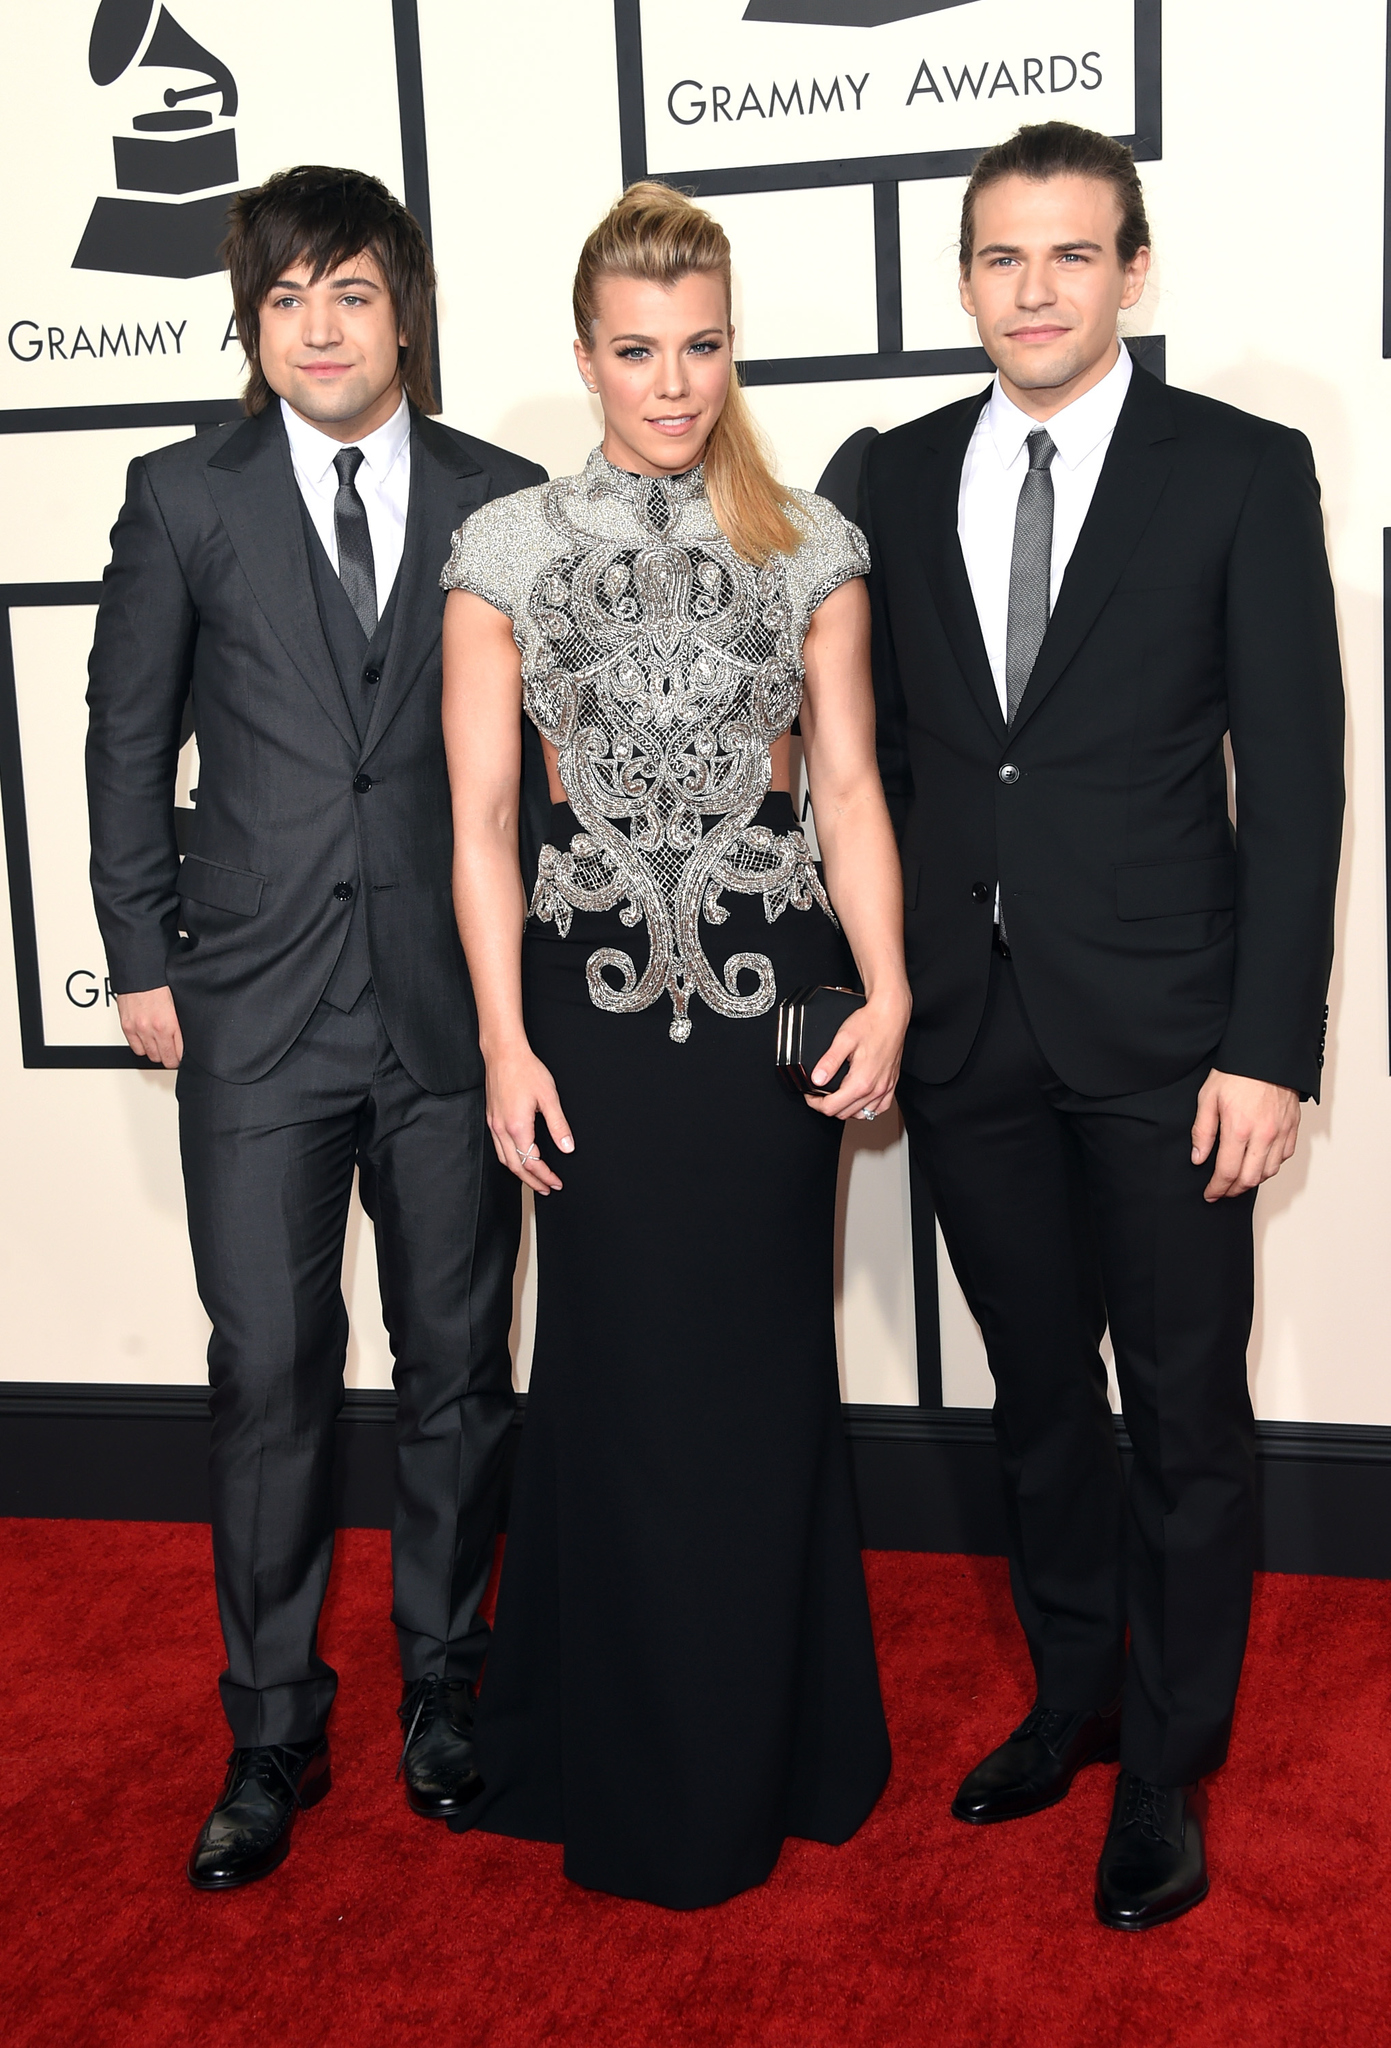 Reid Perry, Kimberly Perry and Neil Perry in The 57th Annual Grammy Awards (2015)